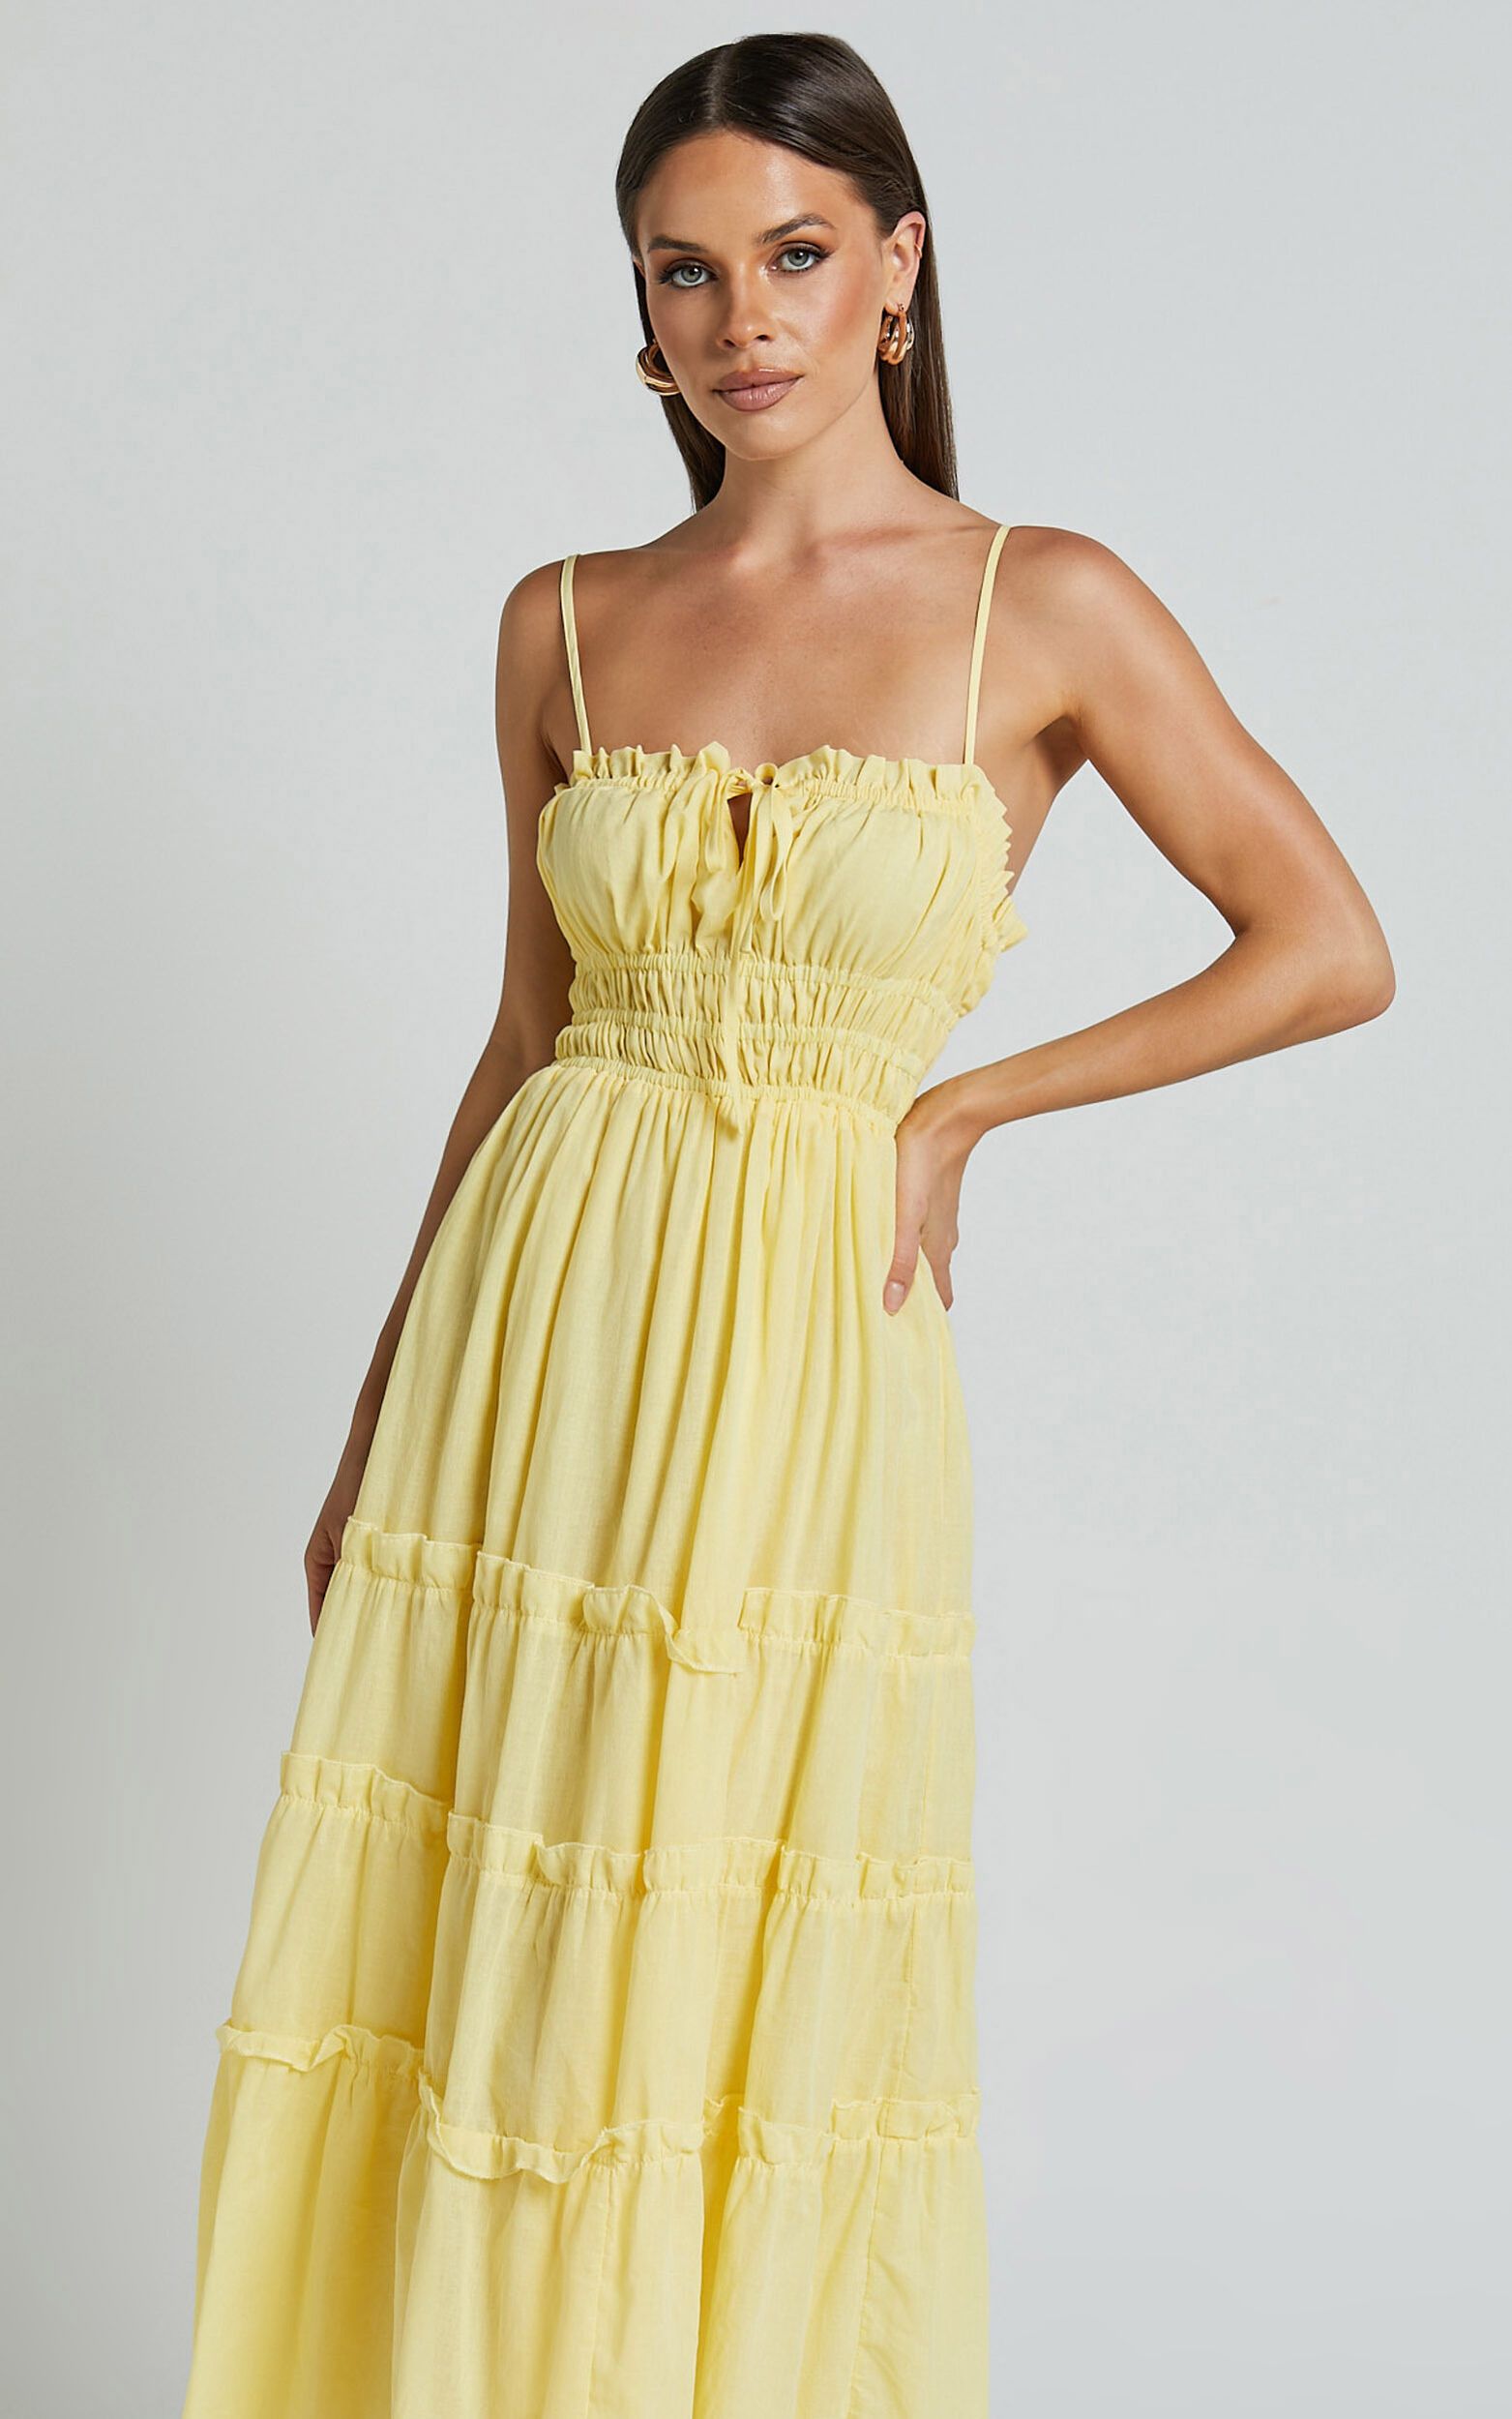 Schiffer Midi Dress - Strappy Ruched Tie Front Tiered Dress in Yellow | Showpo (US, UK & Europe)